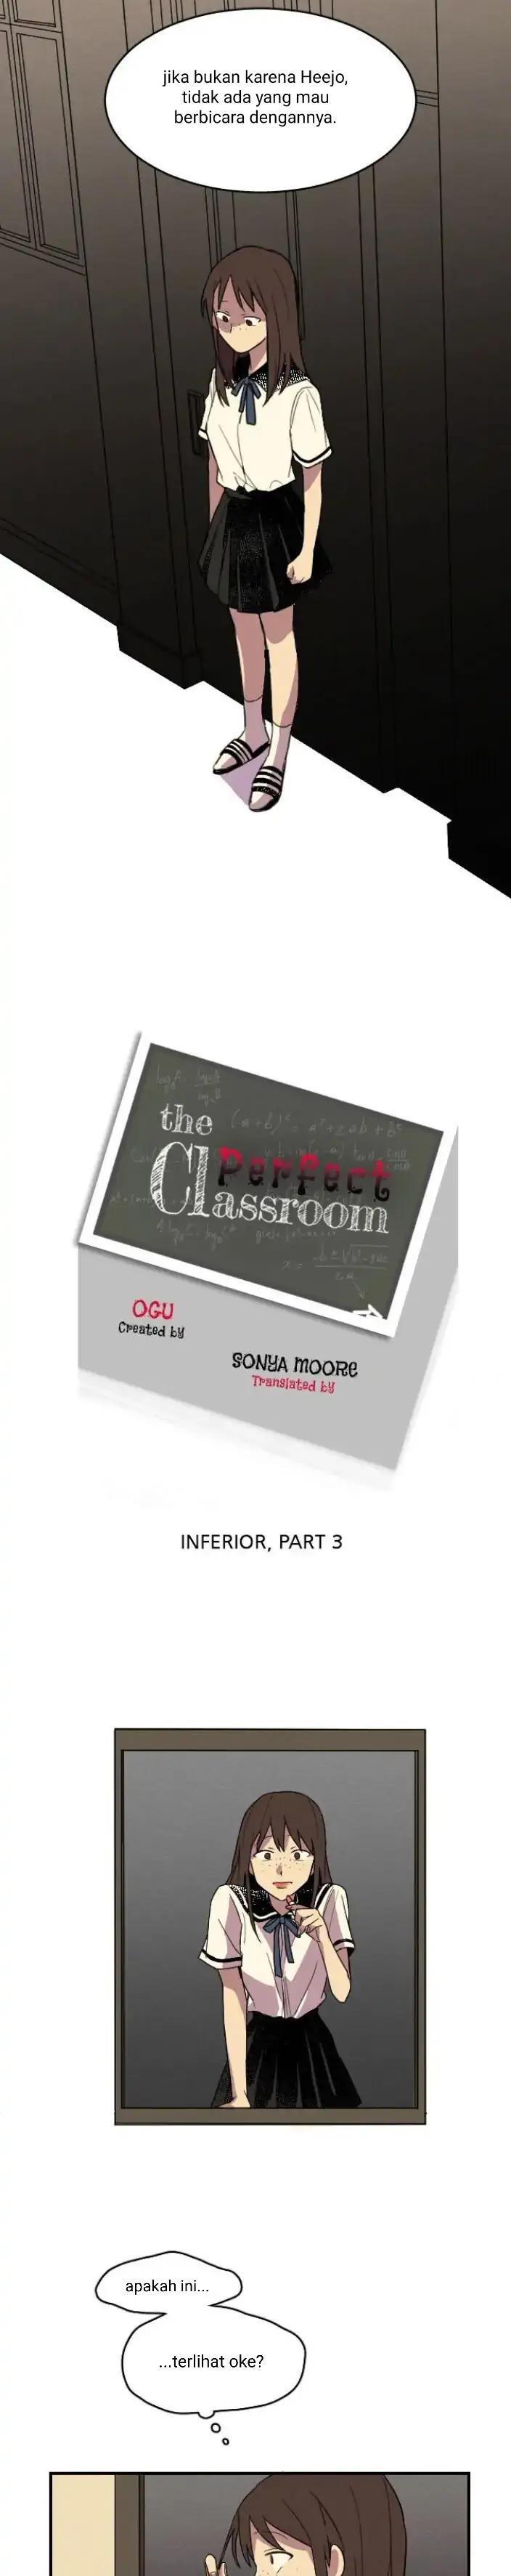 Perfect Classroom Chapter 4